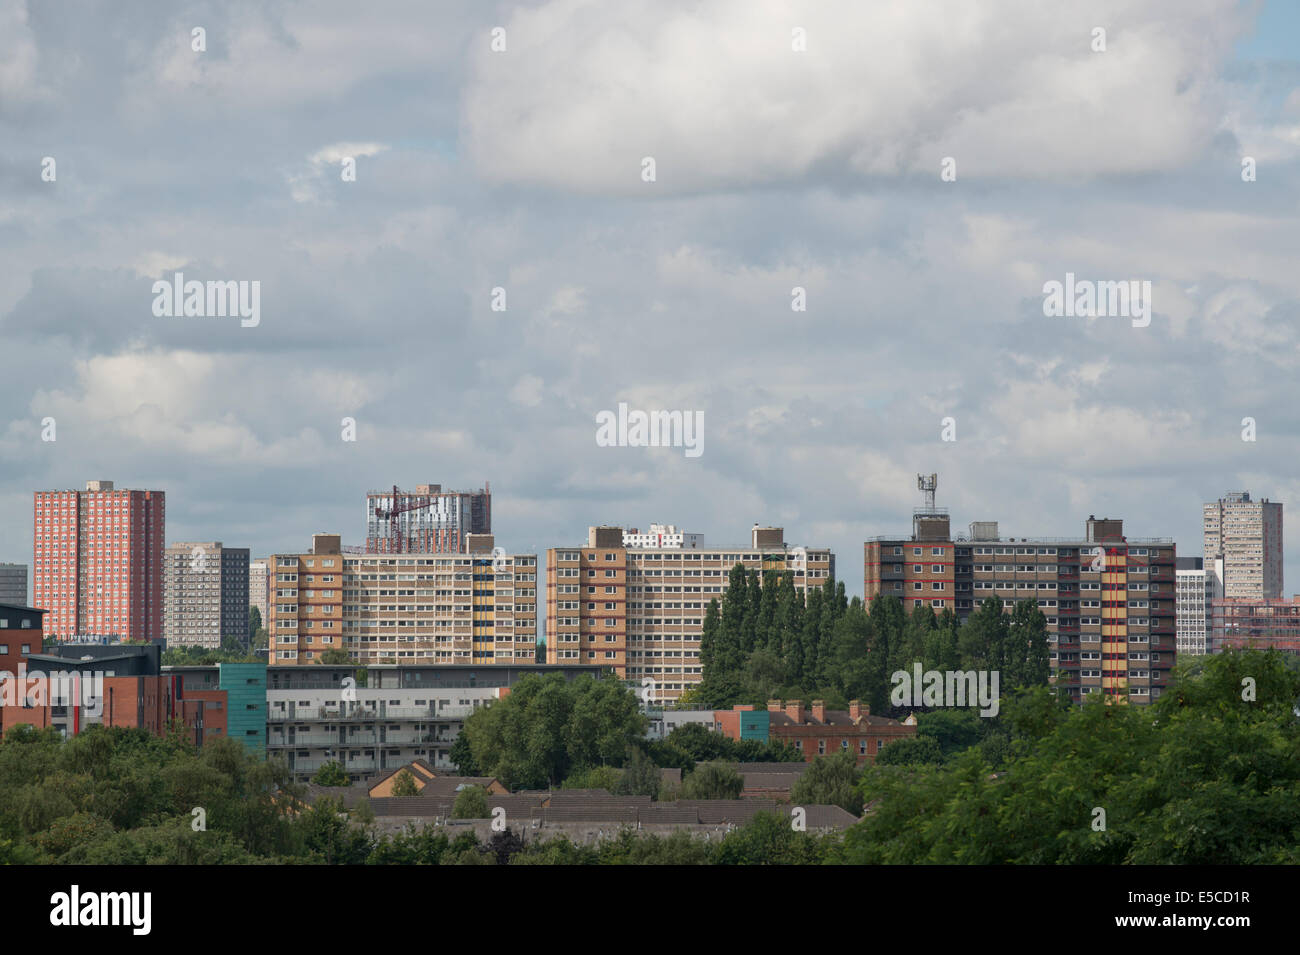 The skyline of the Pendleton area of the Greater Manchester city of Salford, featuring high-rise flats on a cloudy overcast day. Stock Photo